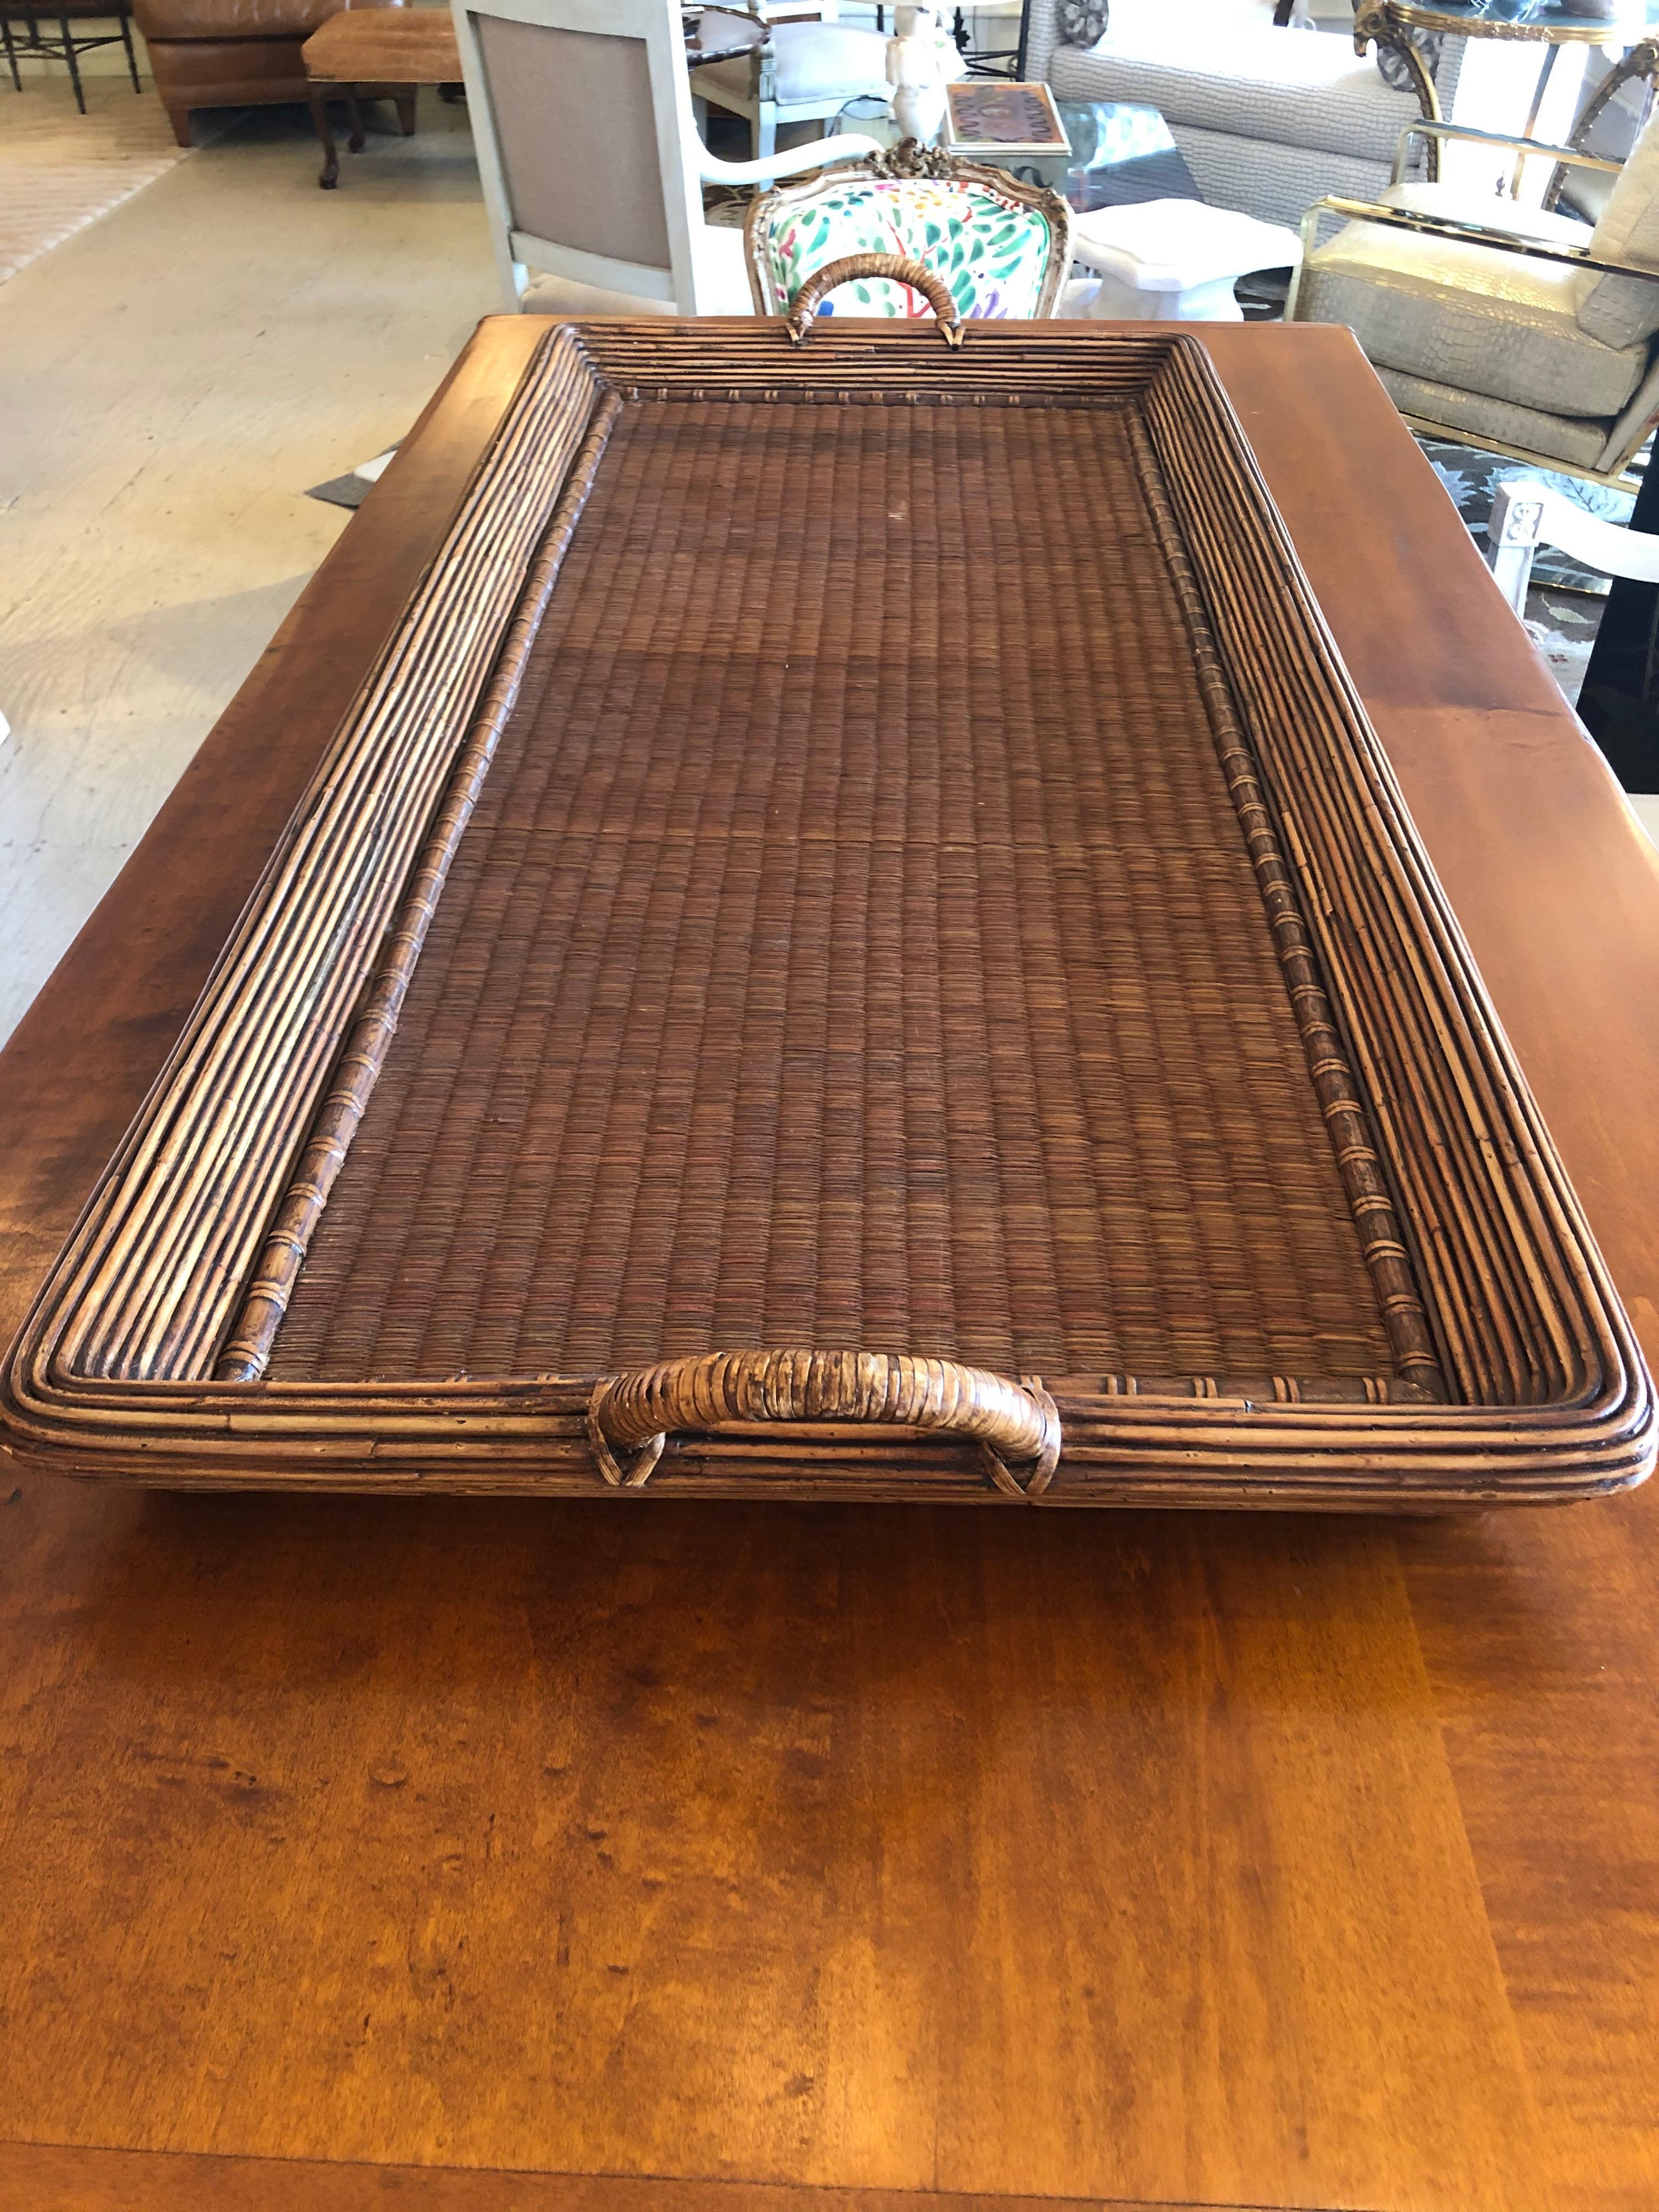 A super sized handsome handled gallery tray, that's a humungous rectangle made of wicker, rattan, wood and seagrass. Would be fabulous on a large ottoman or farm table.
 